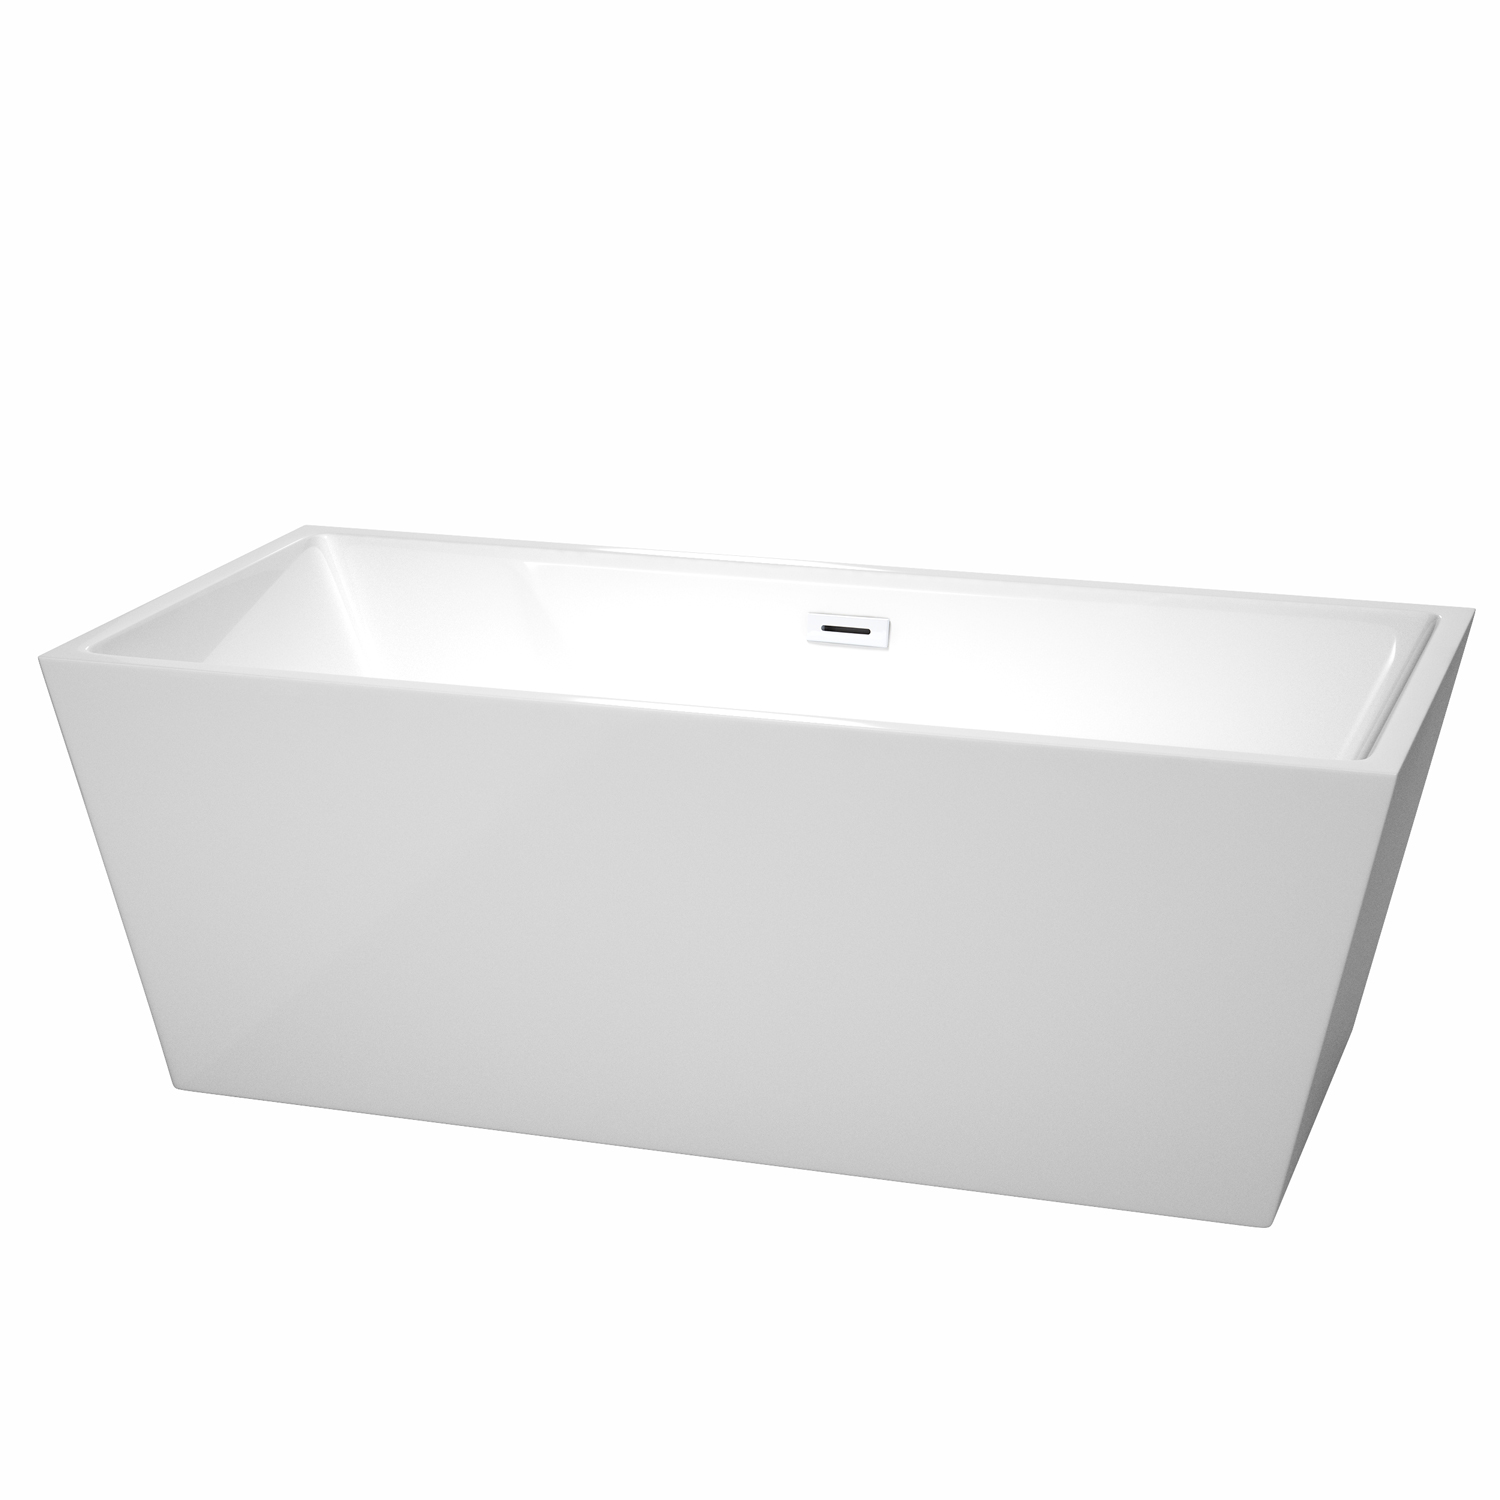 67" Freestanding Bathtub in White with Overflow Trim and Shiny White Drain Finish